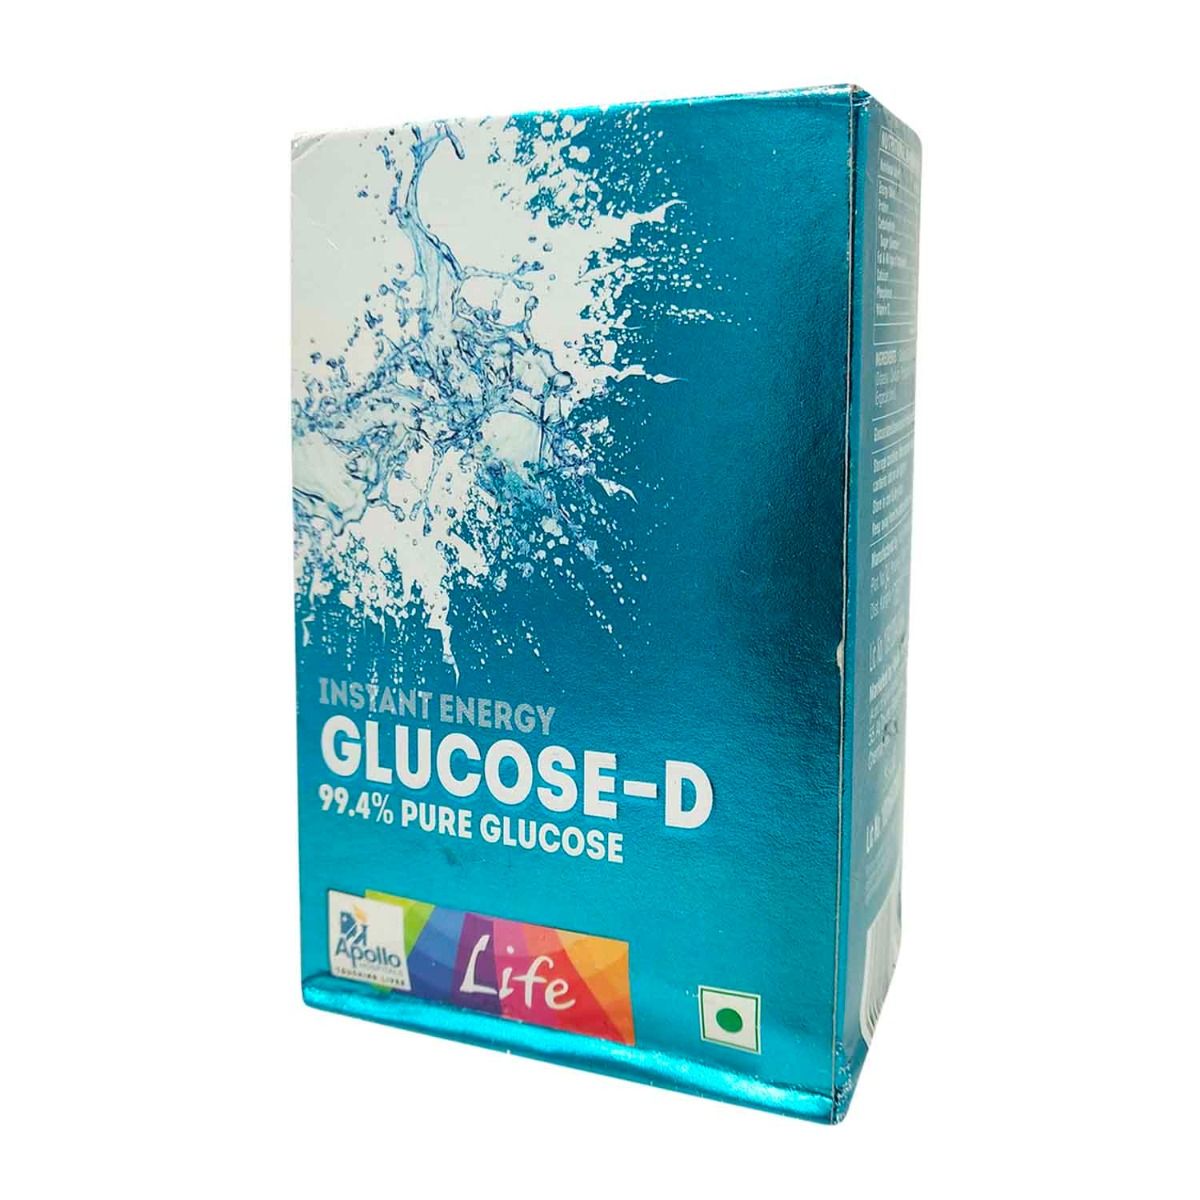 Buy Apollo Life Glucose-D Instant Energy Drink, 500 gm Refill Pack Online